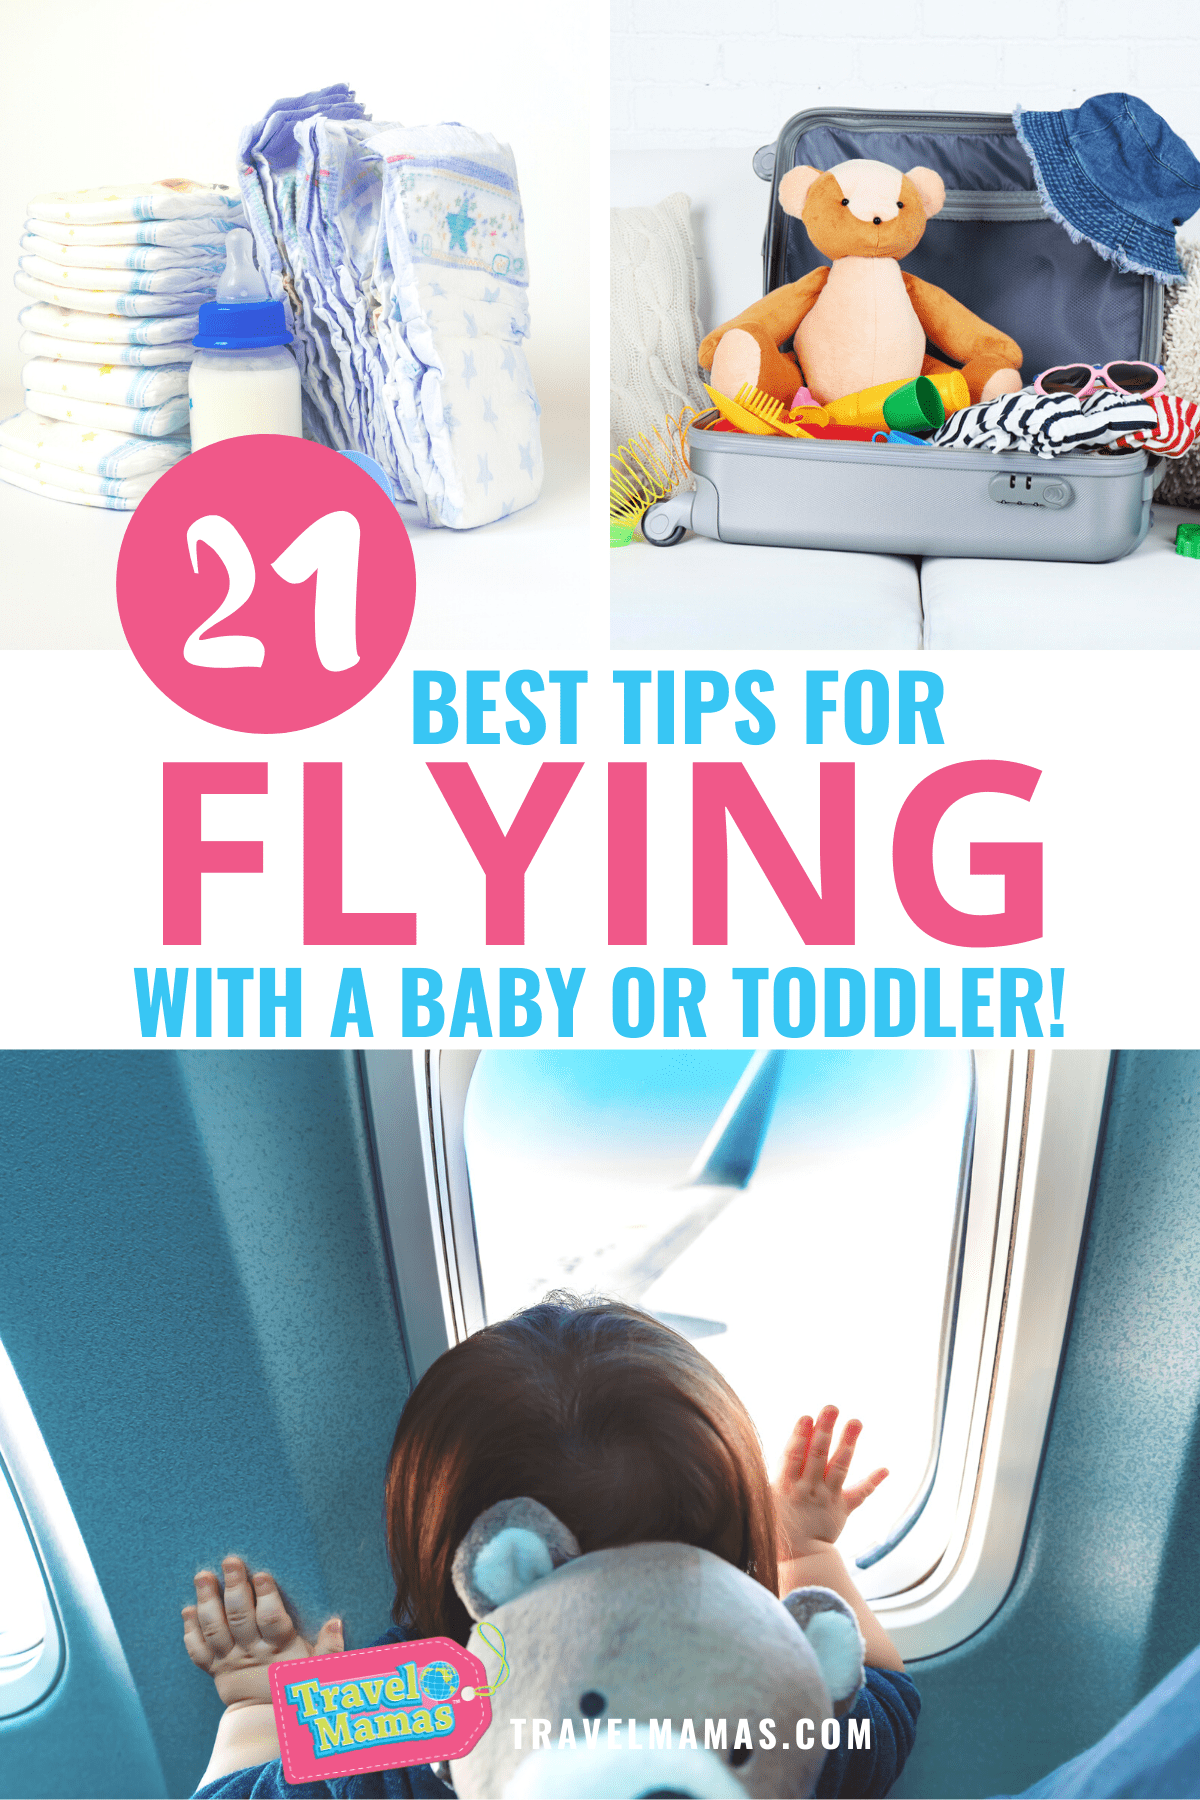 Best Tips for Flying with a Baby or Toddler